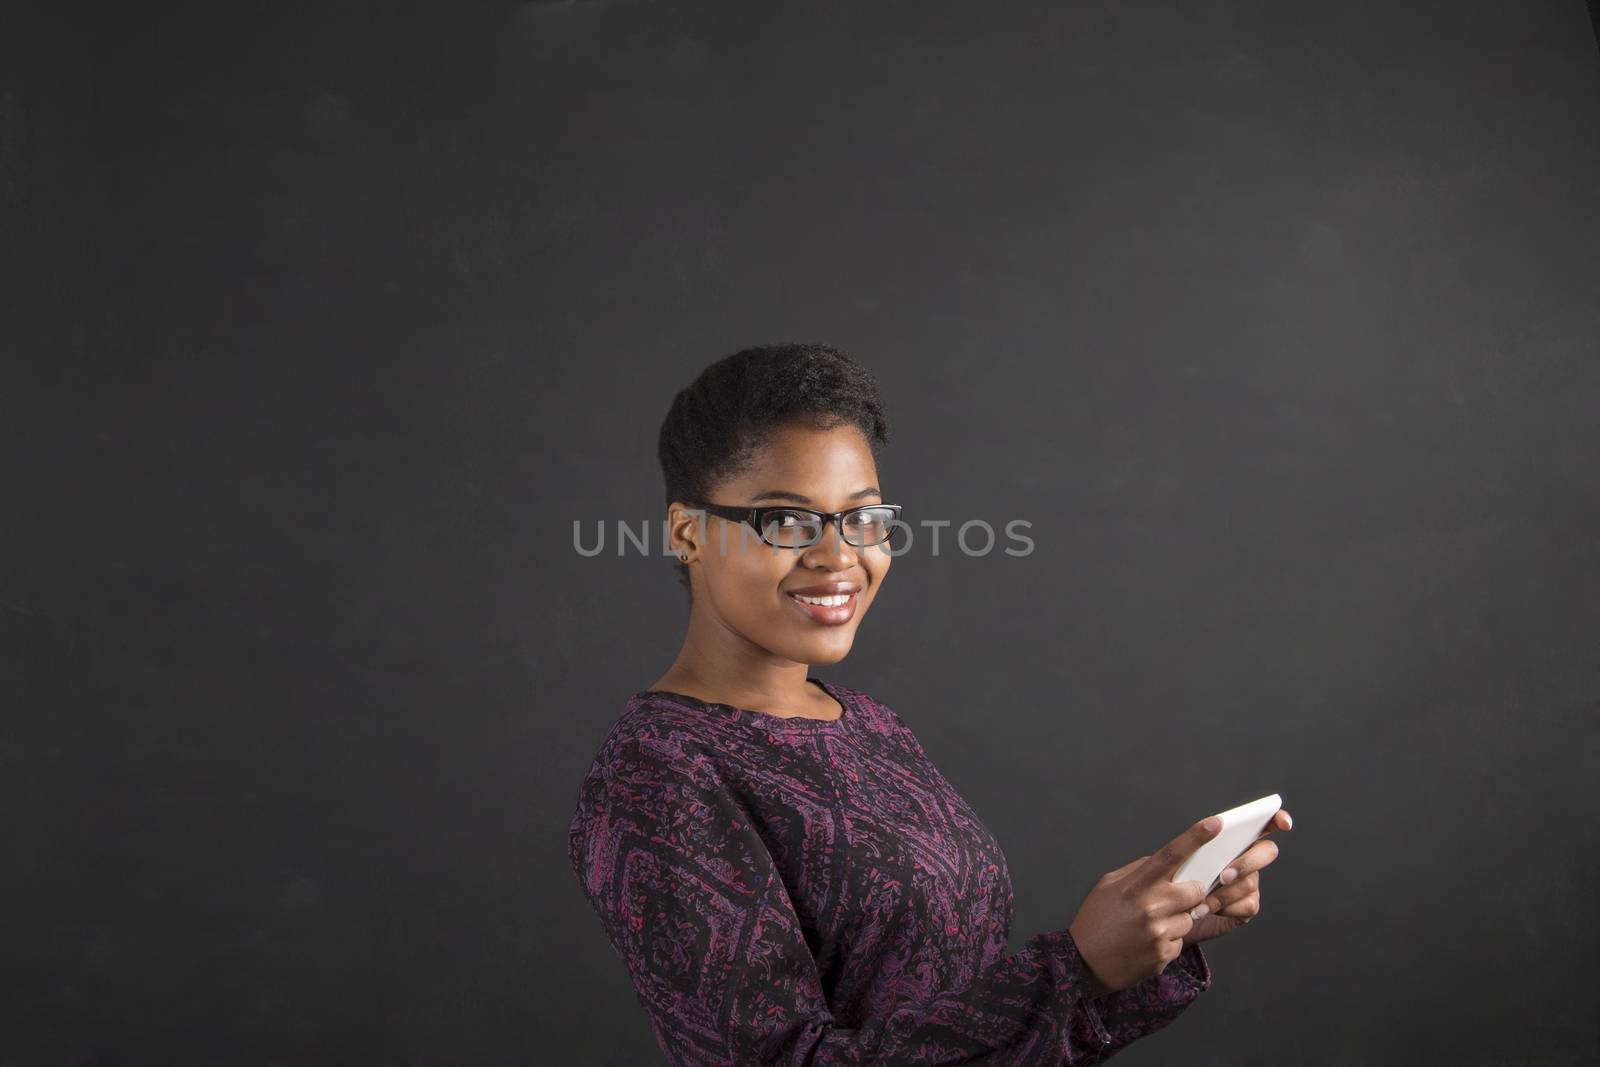 South African or African American black woman teacher or student holding a tablet standing against a chalk blackboard background inside